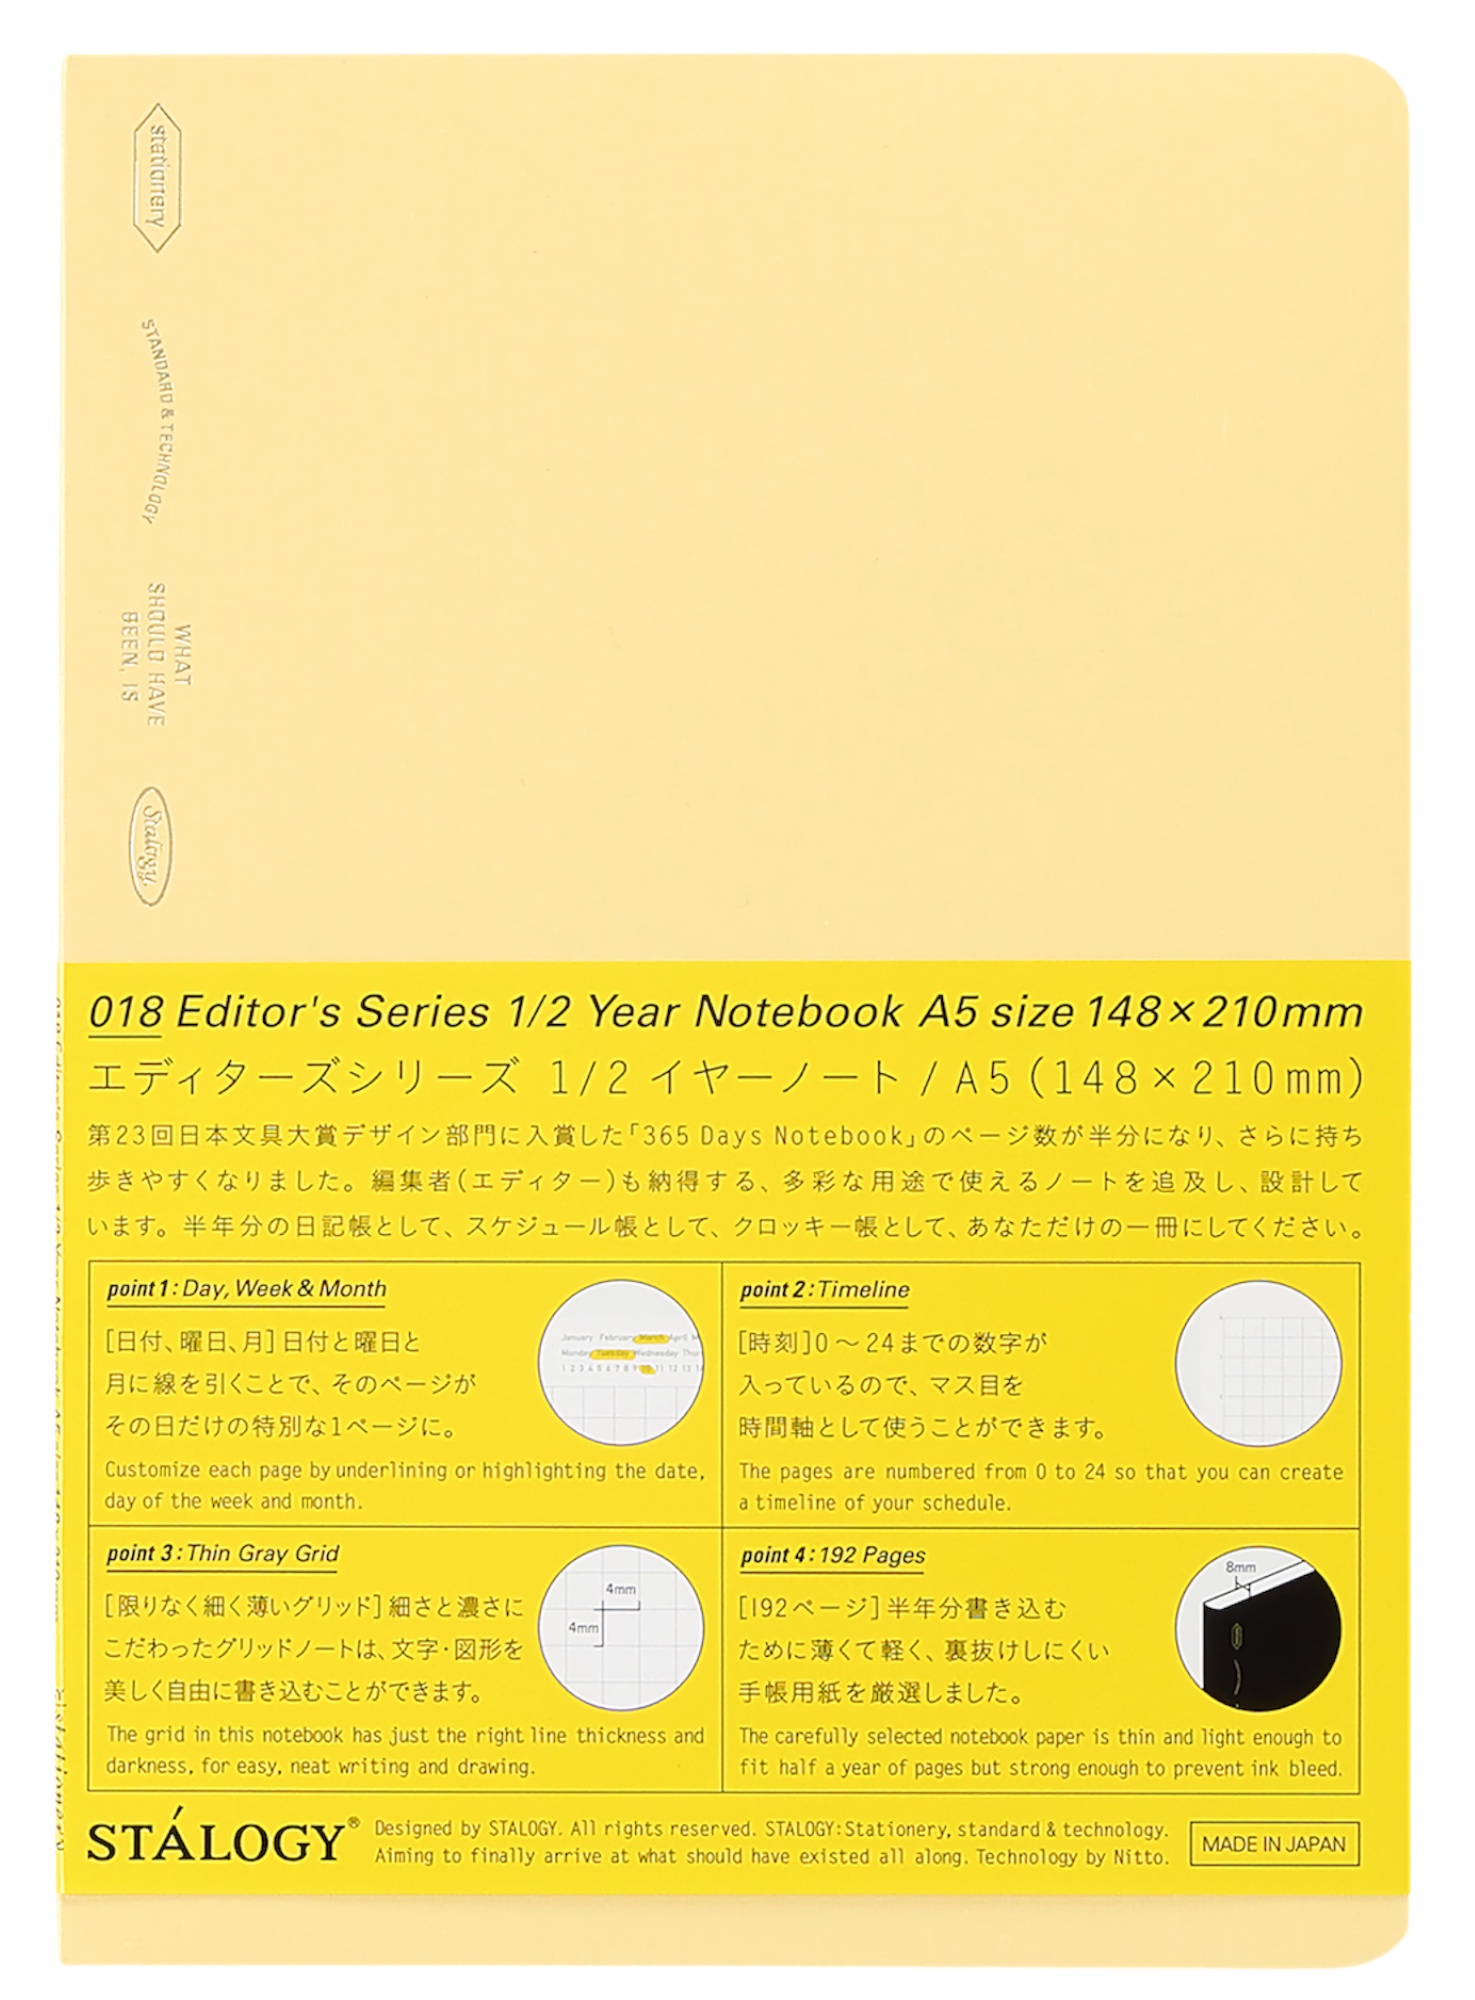 Stálogy 018 1/2 Year Notebook [A5] Butter Yellow [Limited Edition]